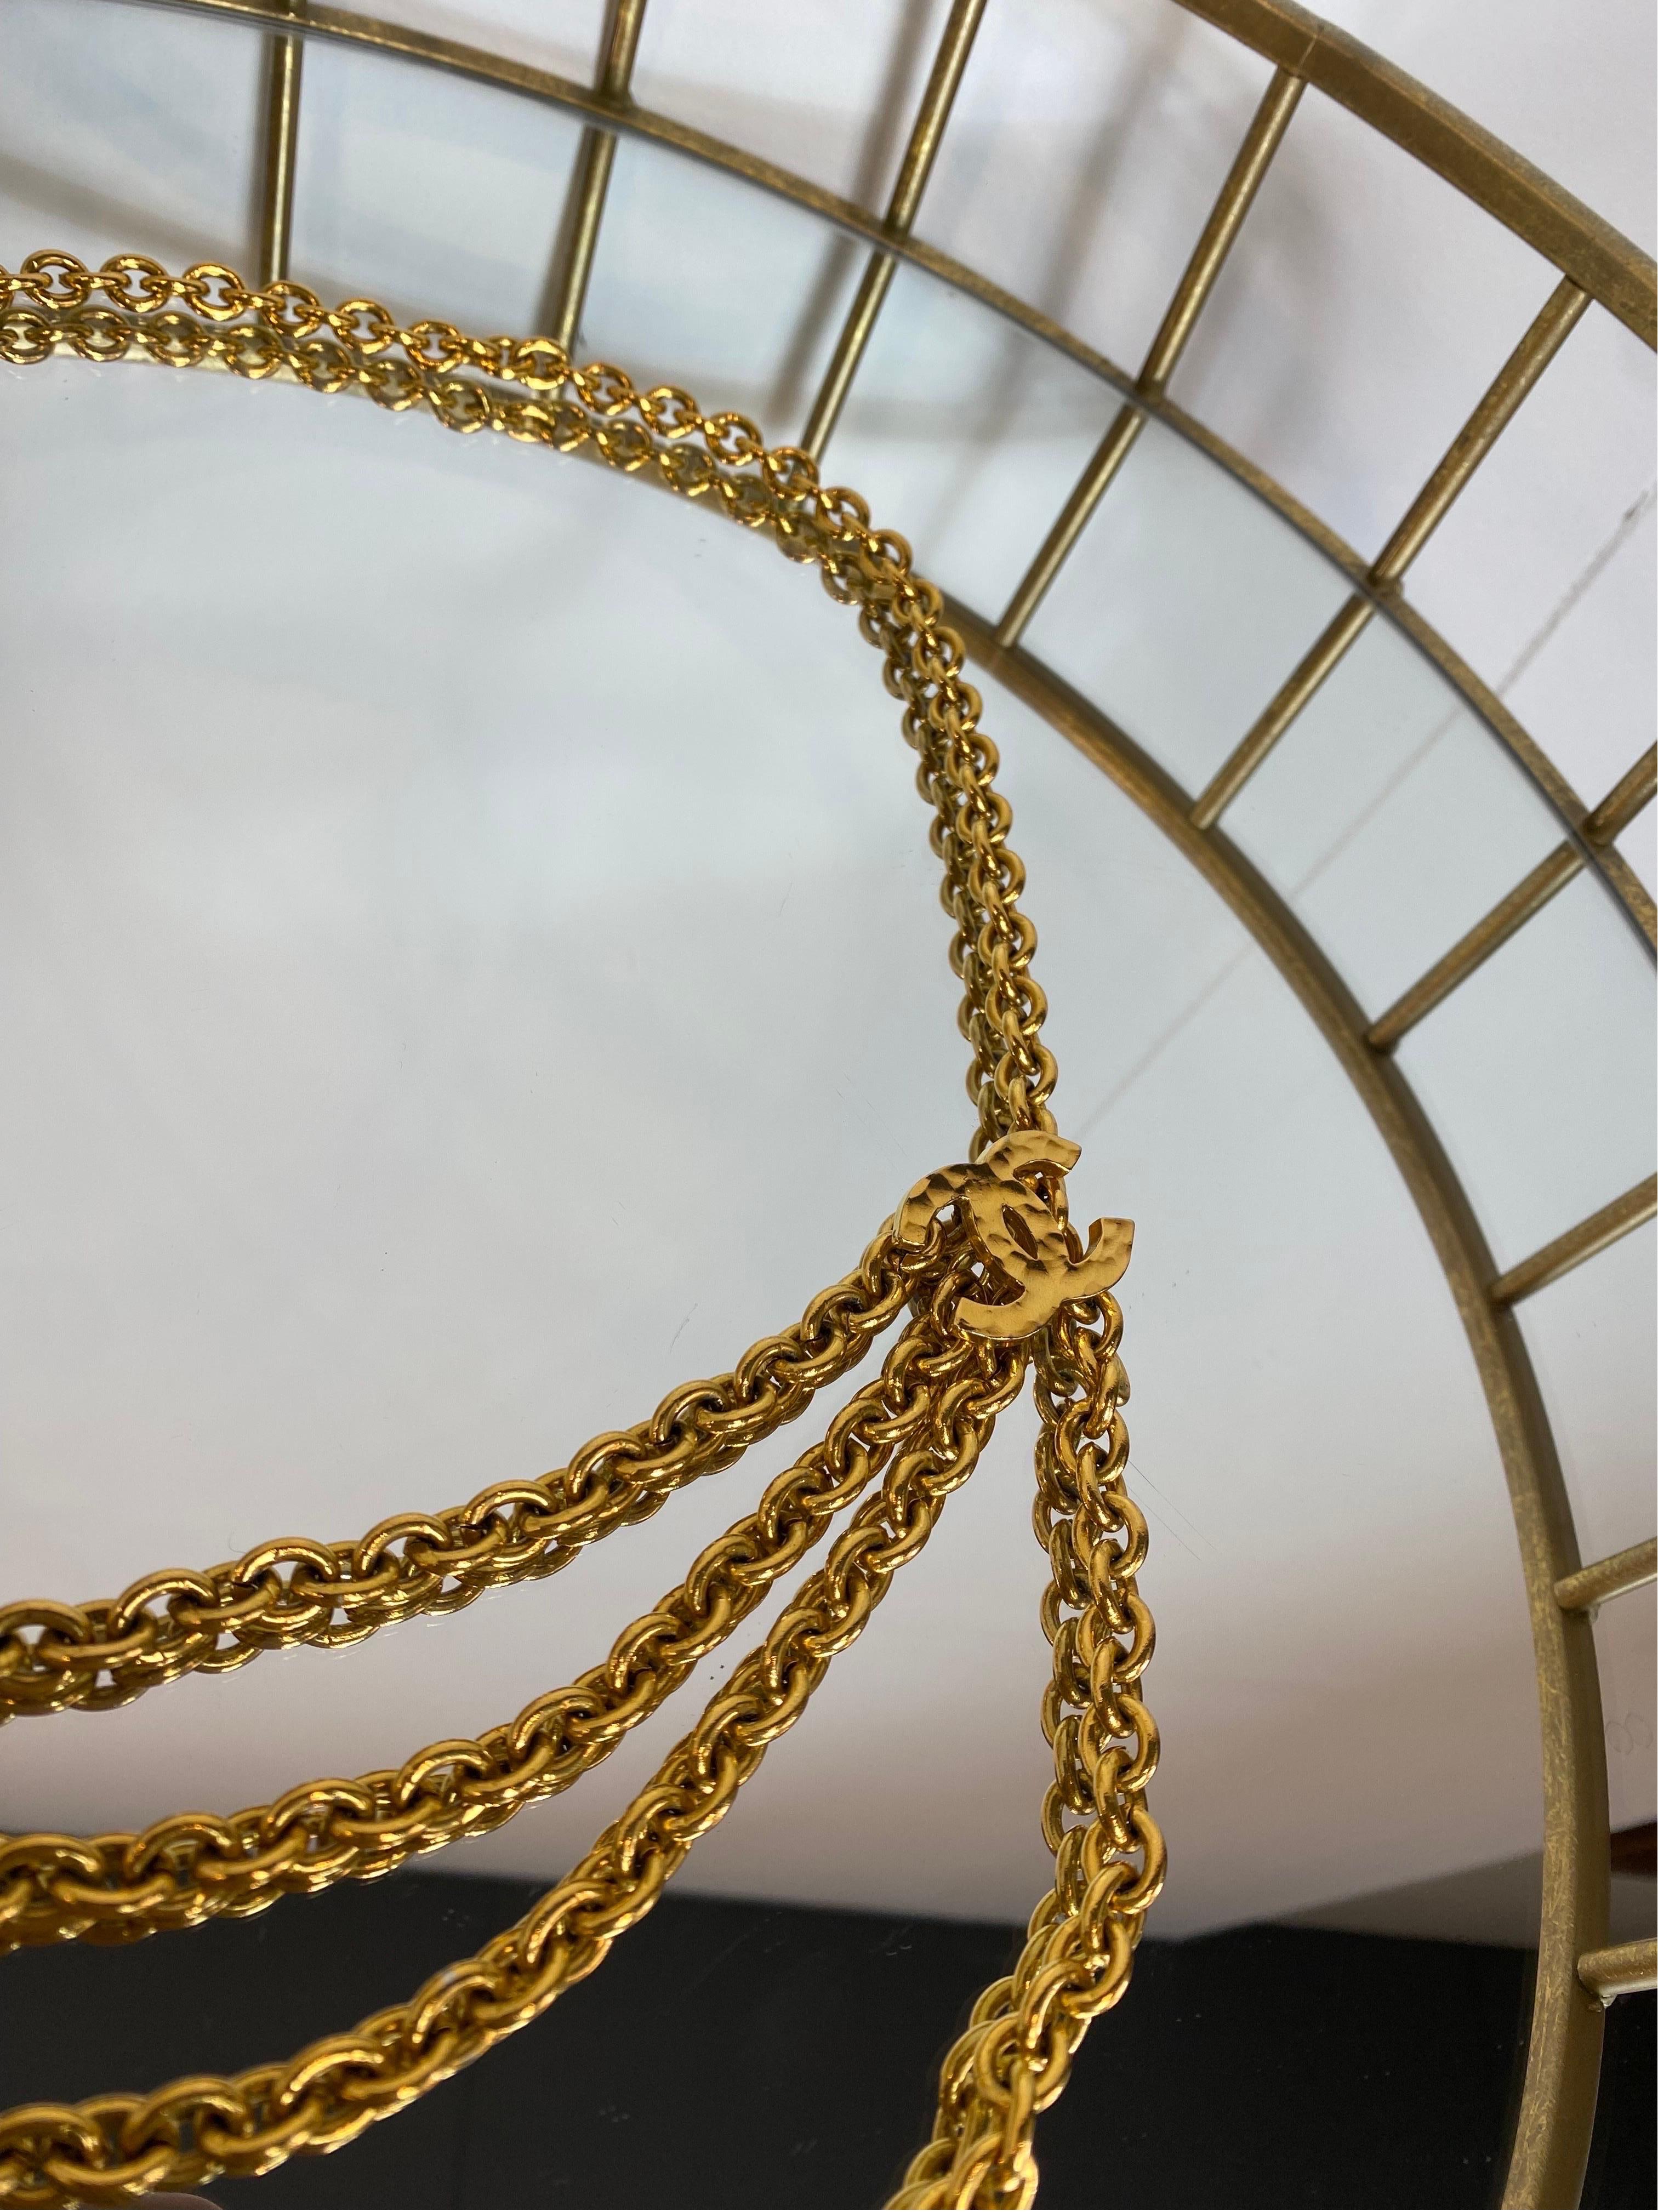 Chanel triple chain belt.
Vintage 80s.
In gold-colored metal.
With CC Chanel detail.
Total length 92 cm
The closure is adjustable thanks to the hook.
It can also be used as a necklace.
Excellent general condition, very well kept. Shows minimal signs